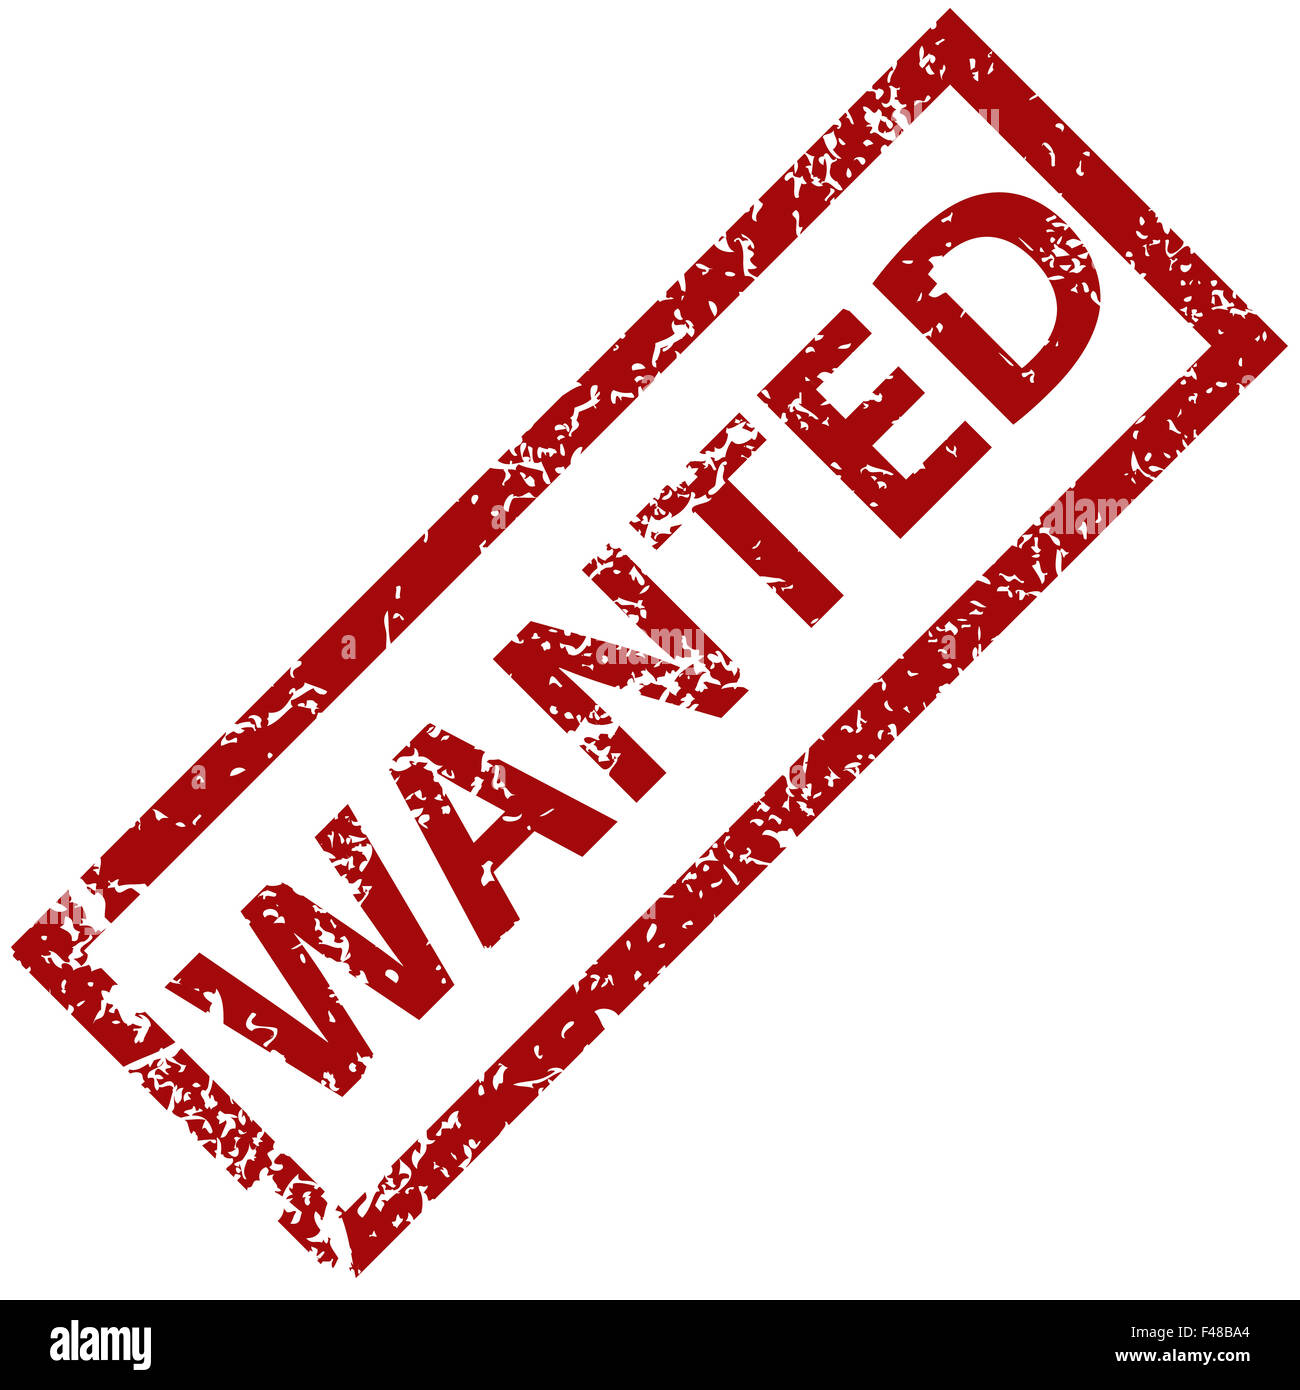 Wanted rubber stamp Stock Photo